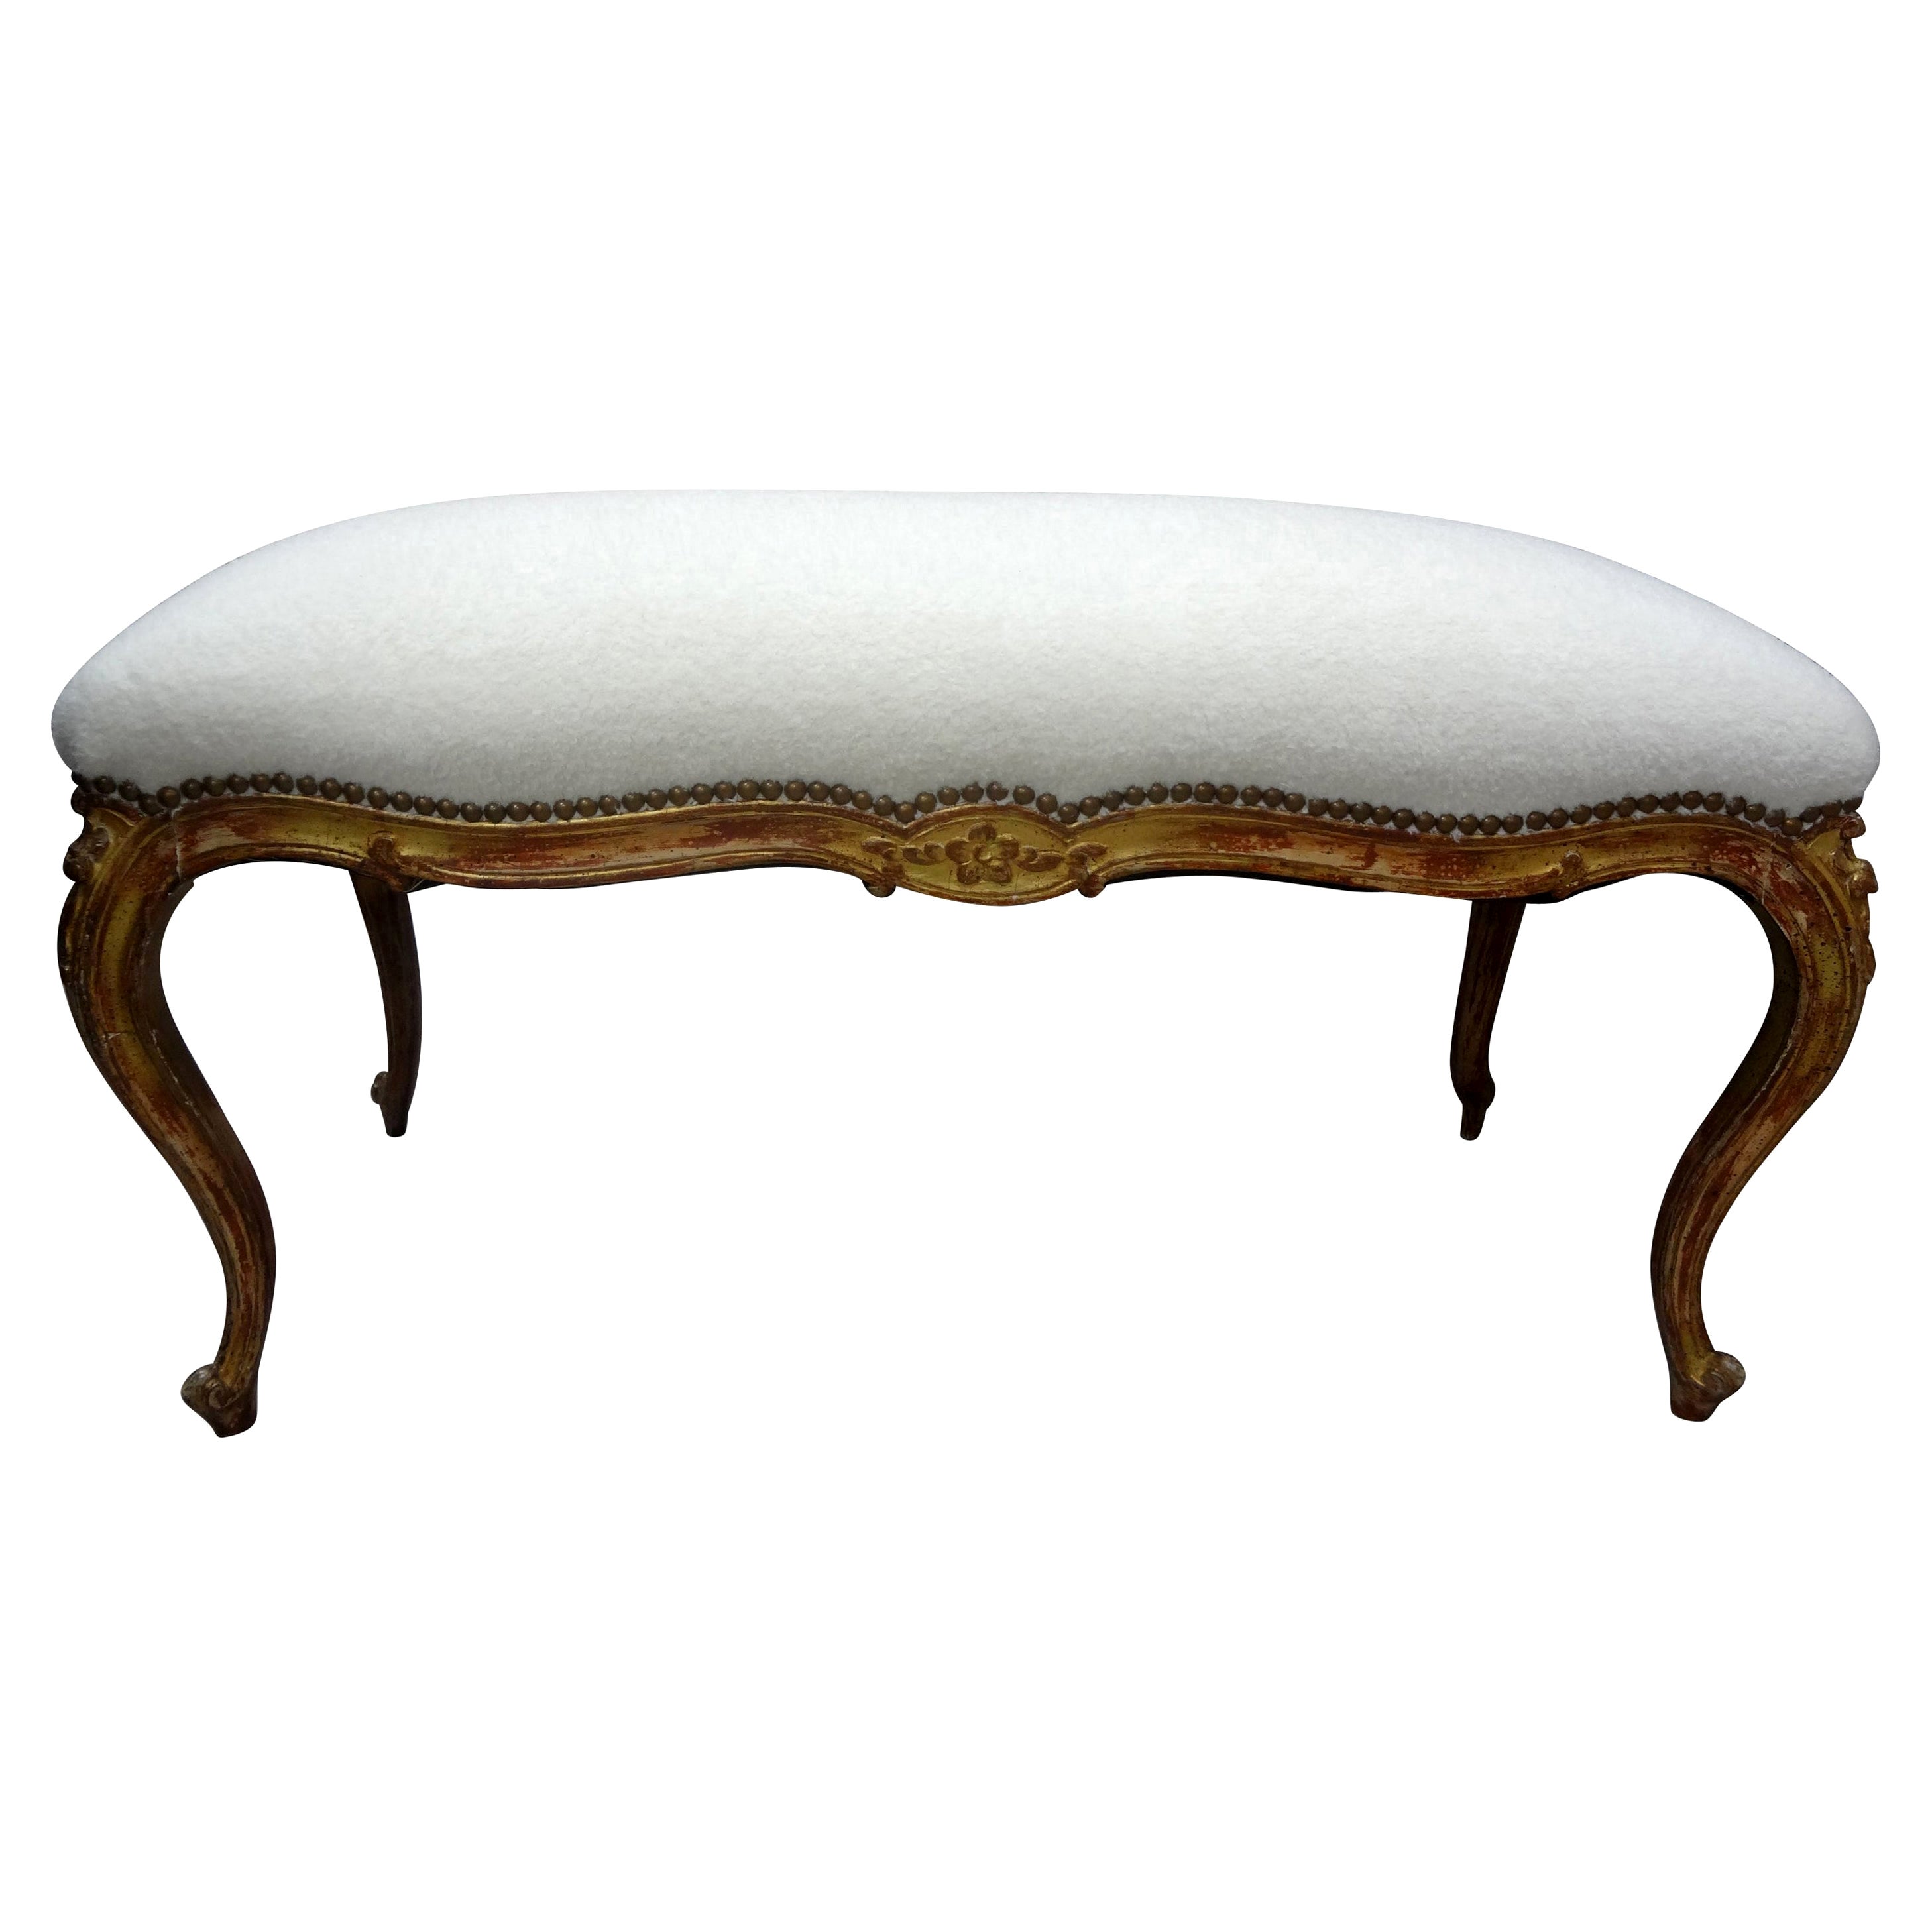 19th Century French Louis XV Style Giltwood Bench